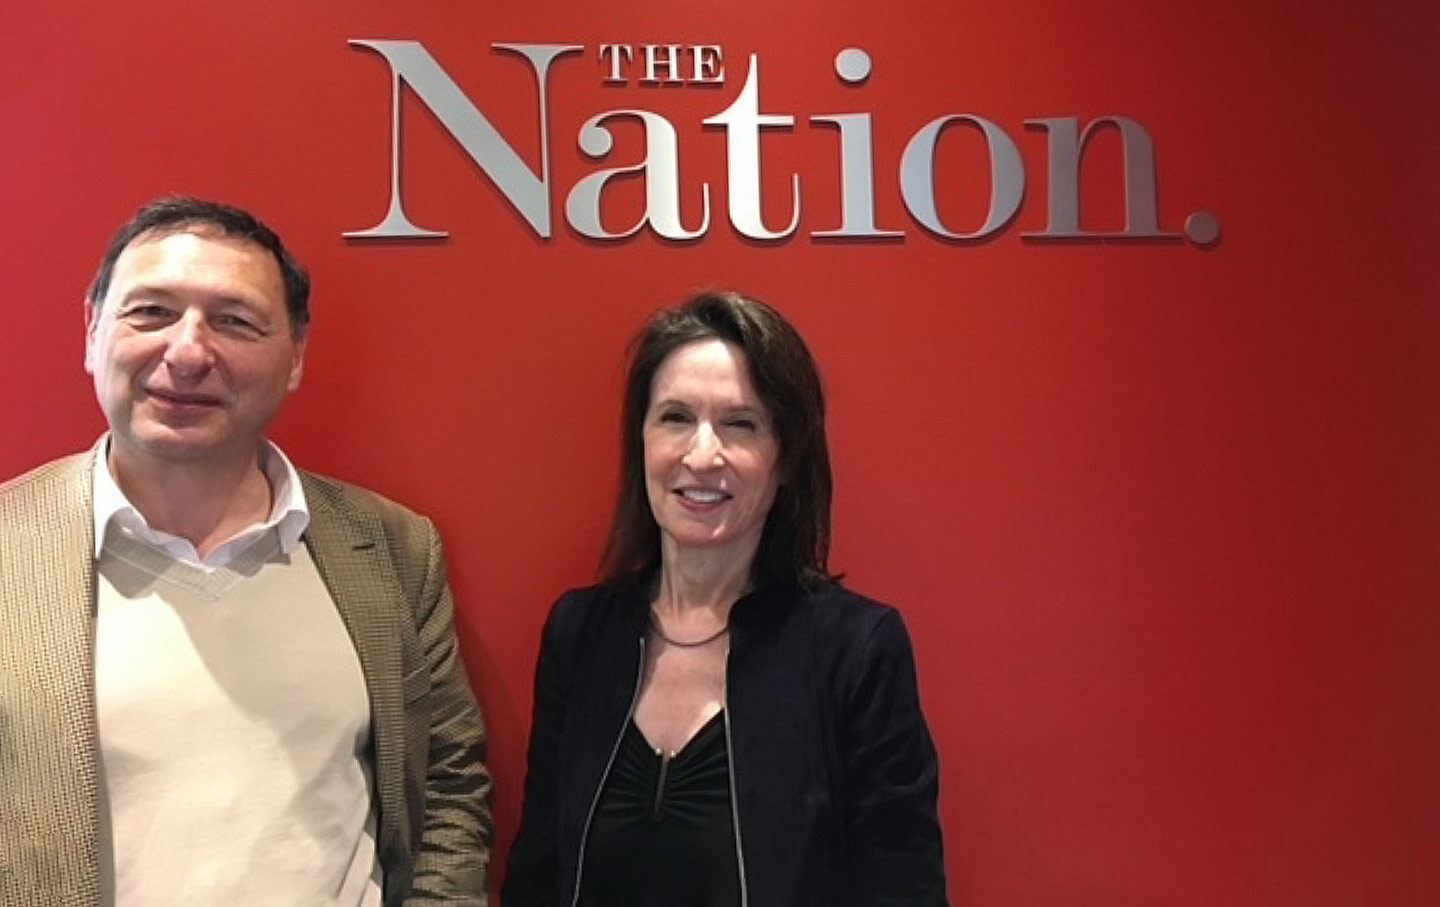 Contributor Boris Kagarlitsky (left) and editorial director and publisher Katrina vanden Heuvel (right) in The Nation's offices, 2019.